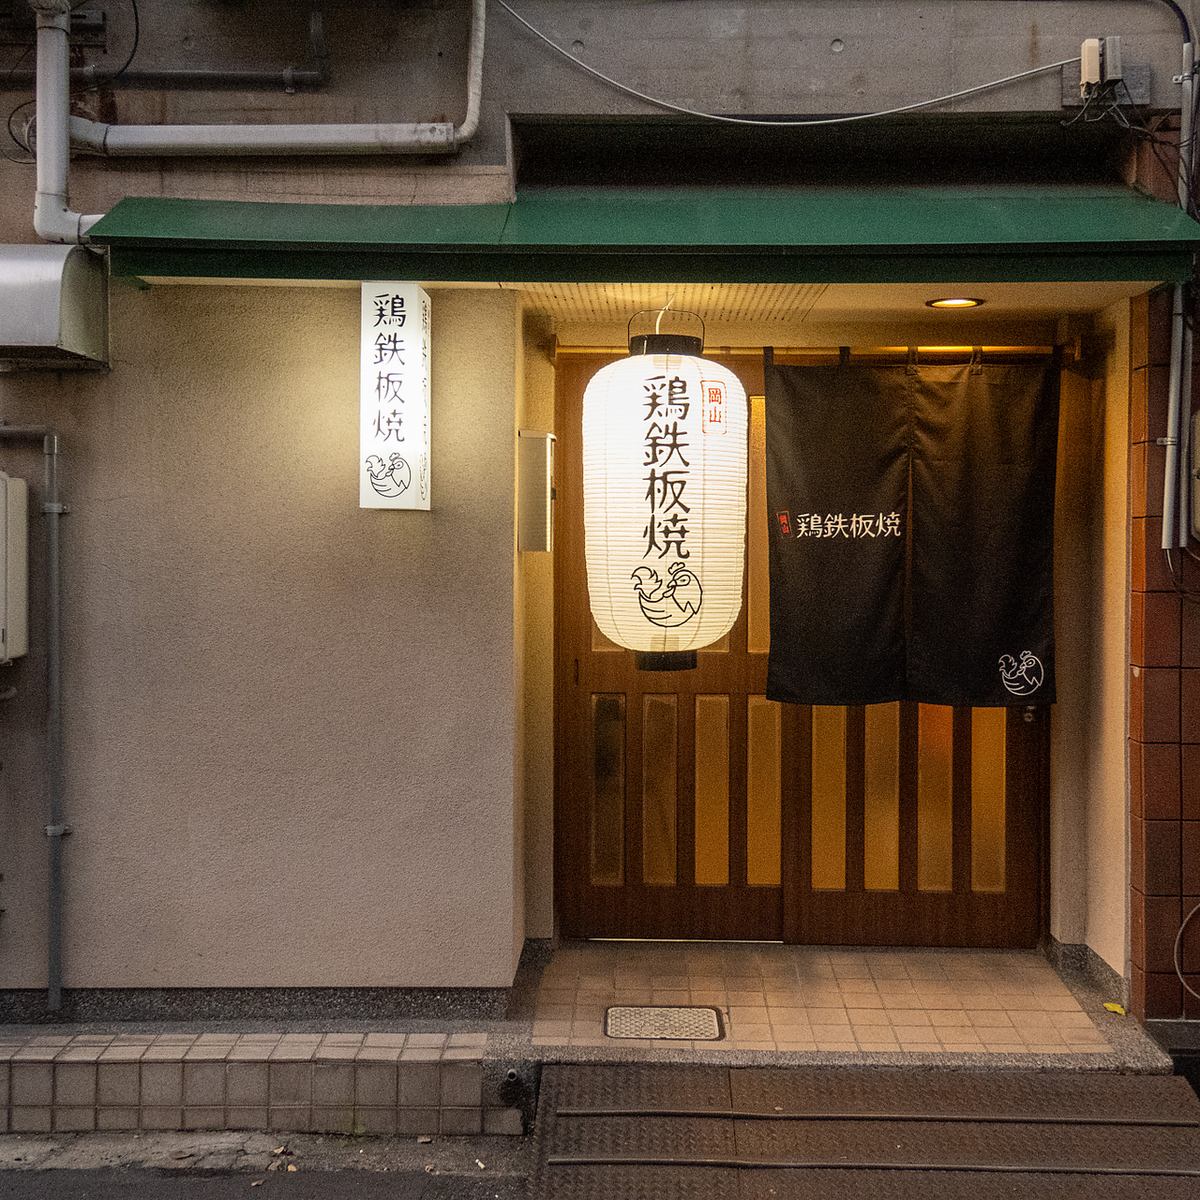 A new teppanyaki izakaya that you can use after work has opened in the Yanagimachi area!!